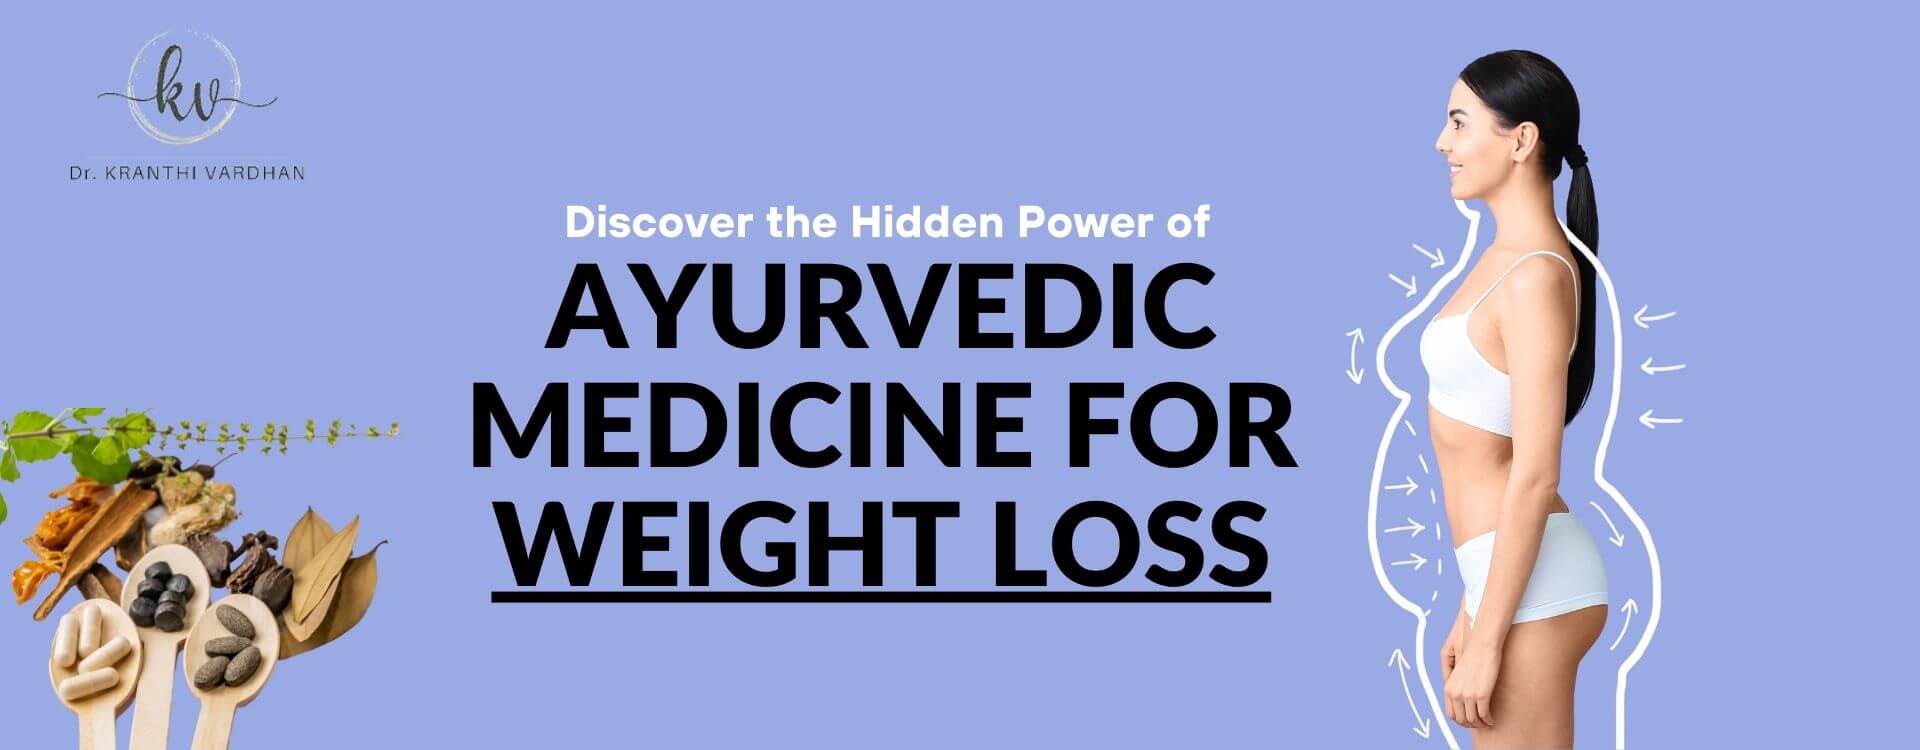 Discover the Hidden Power of Ayurvedic Medicine for Weight Loss